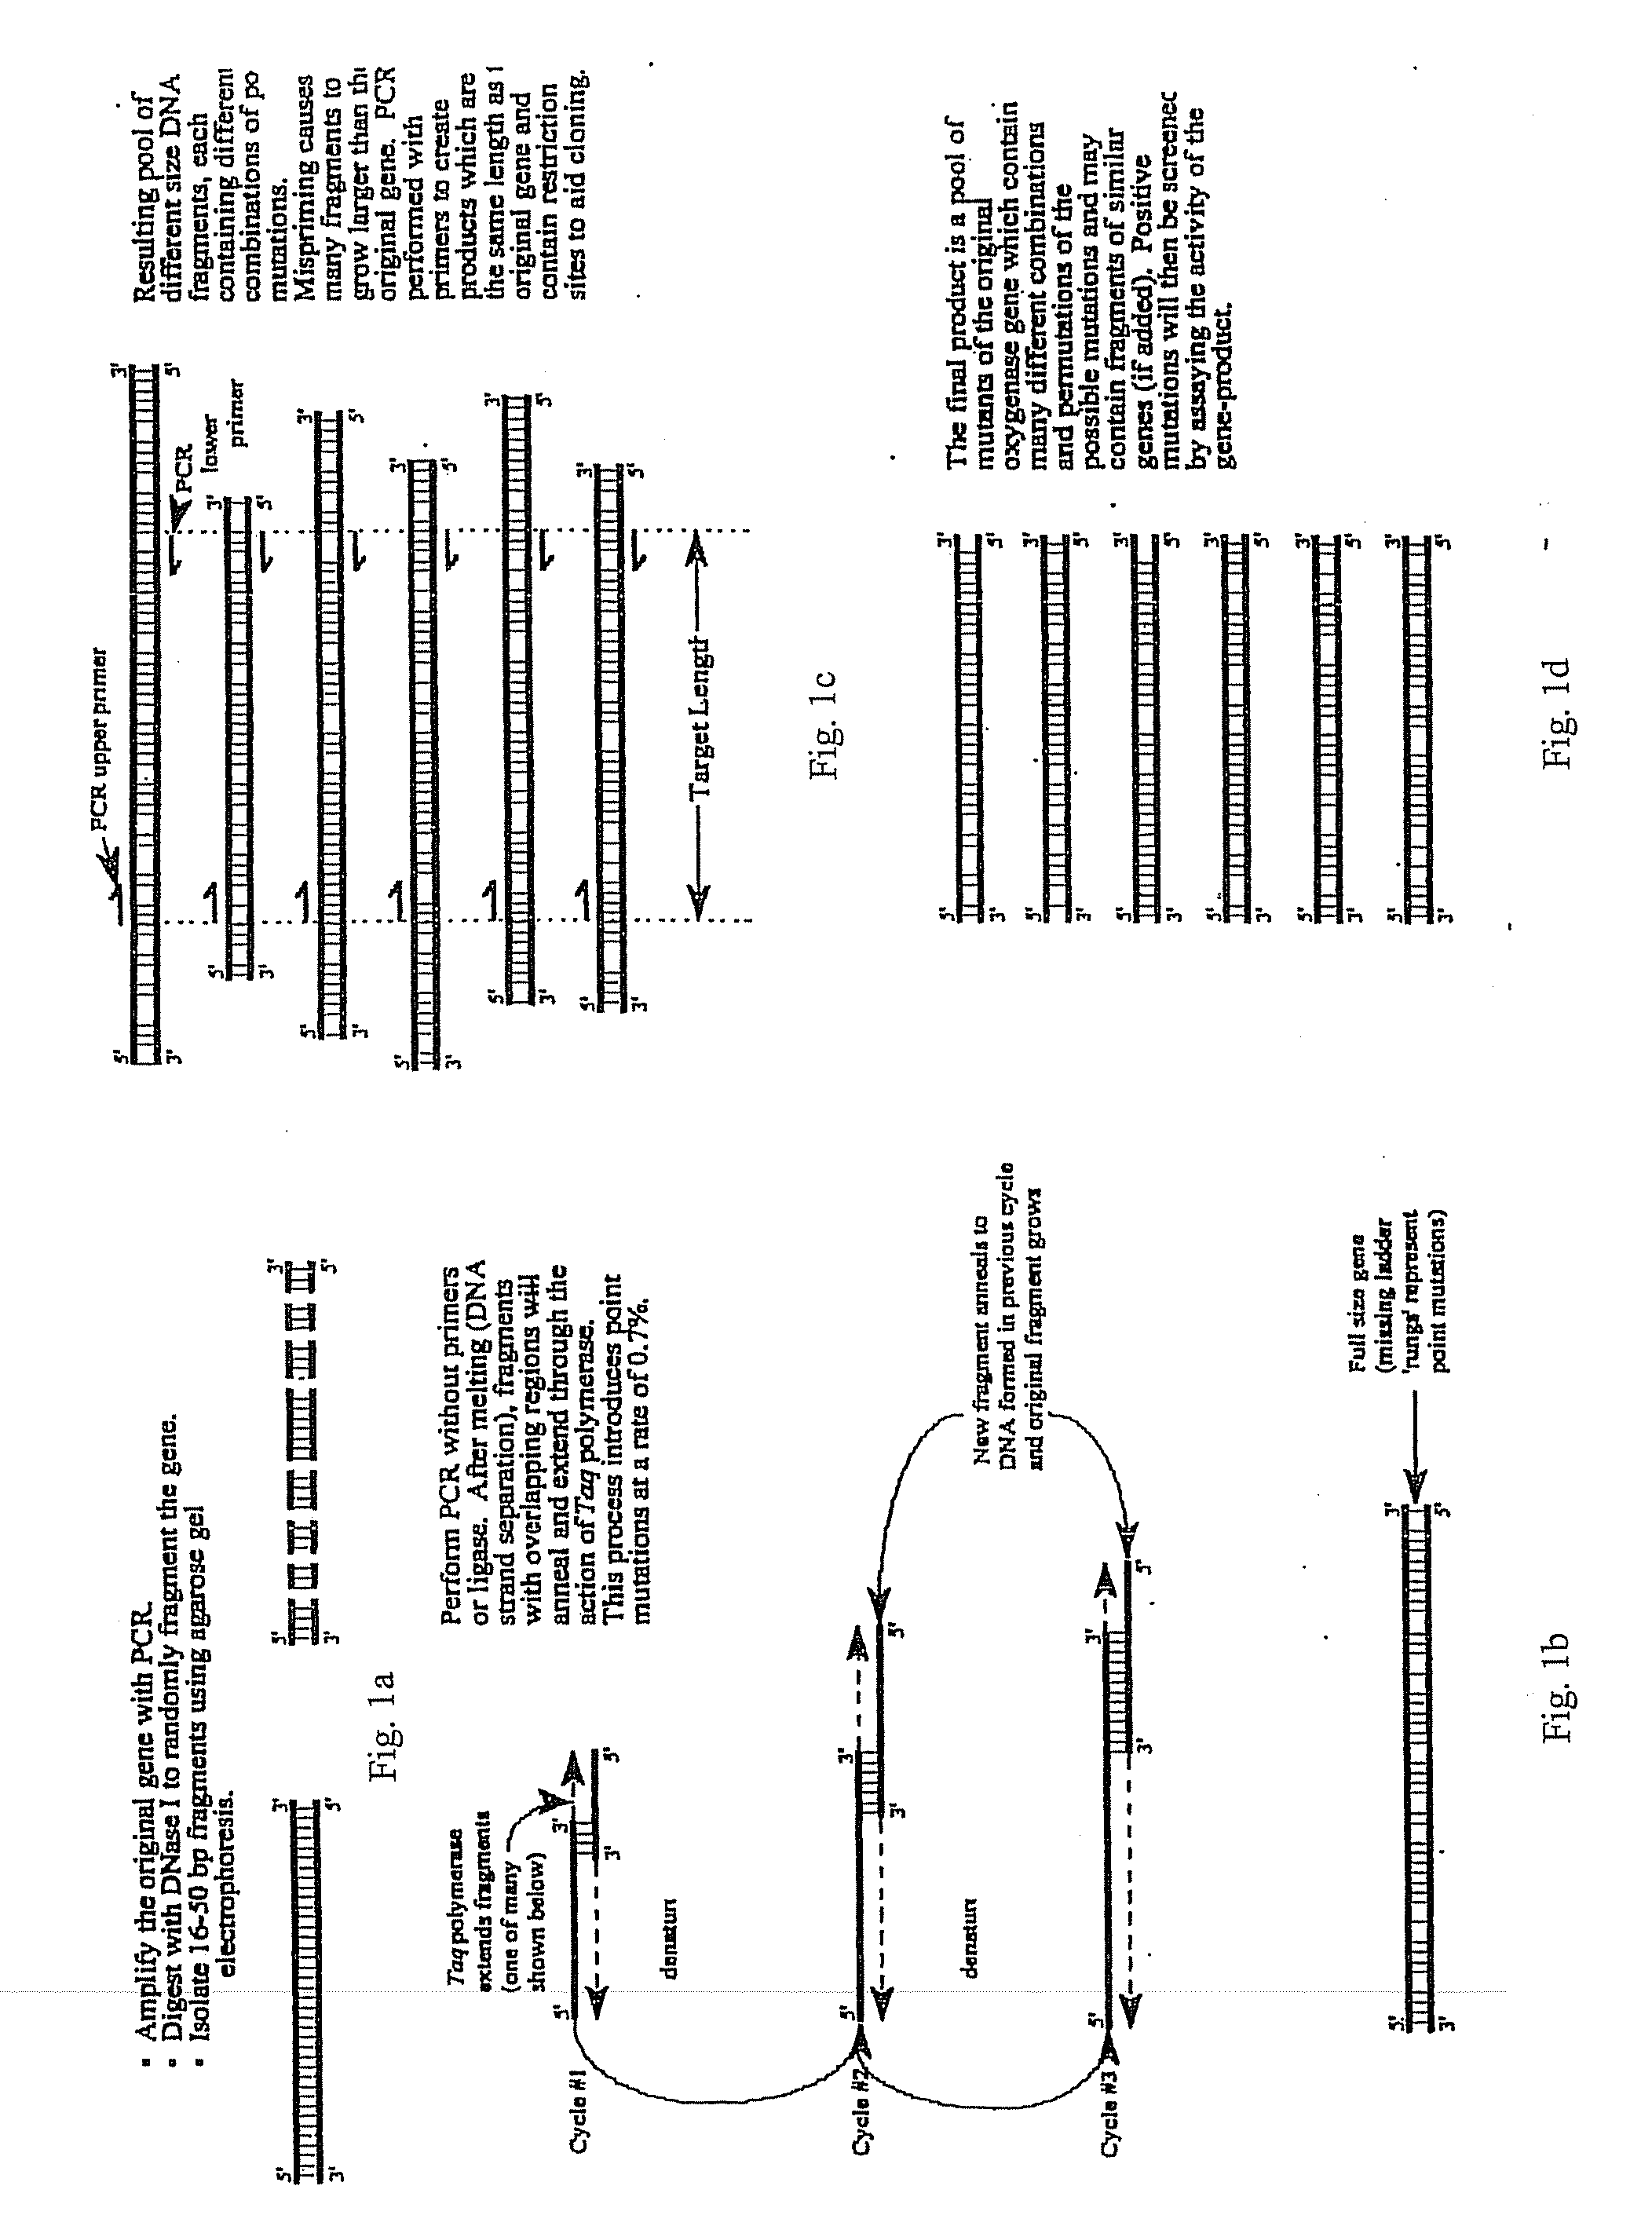 Dental materials, methods of making and using the same, and articles formed therefrom